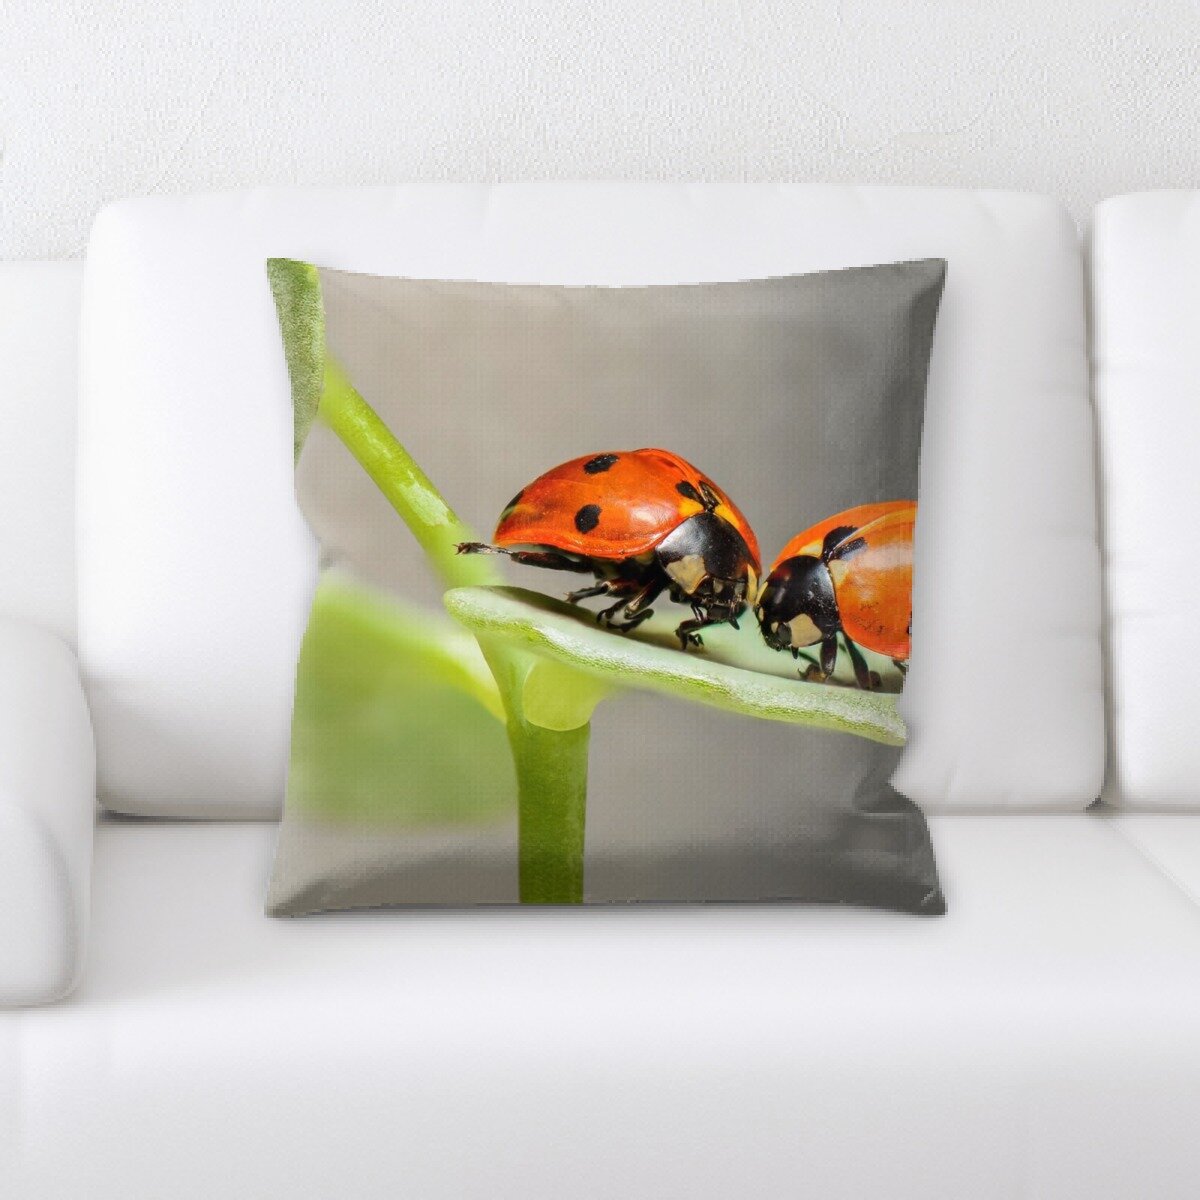 Multicolor Ladybug Art For The Ladybug Lover Cute Ladybugs with Star Pattern On Brown Background Throw Pillow 18x18